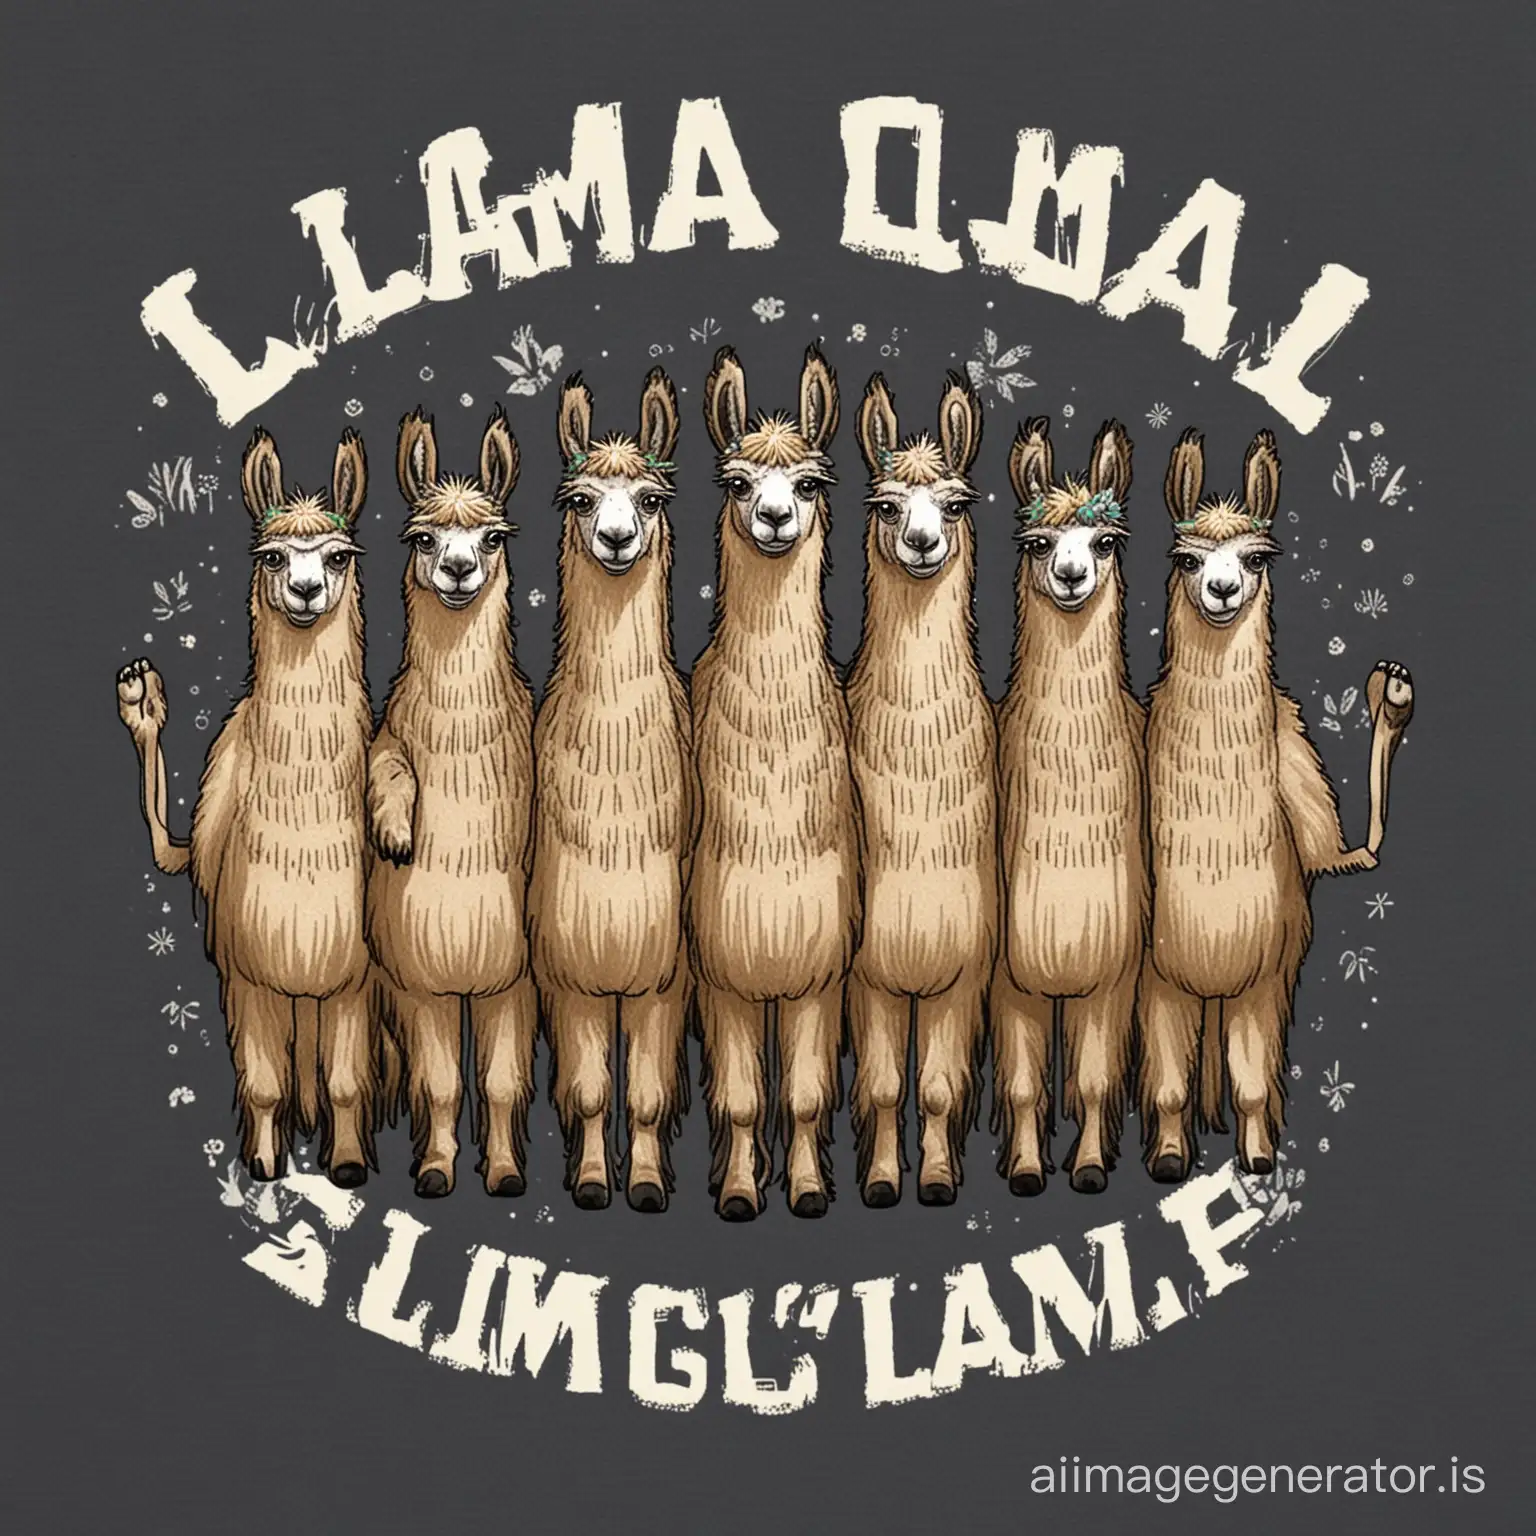 Cool llama themed DESIGN with "Llama squad" for zookeepers, farmers, campers, backpackers and hikers. . I WANT JUST THE DEISGN WITHOUT SHIRT